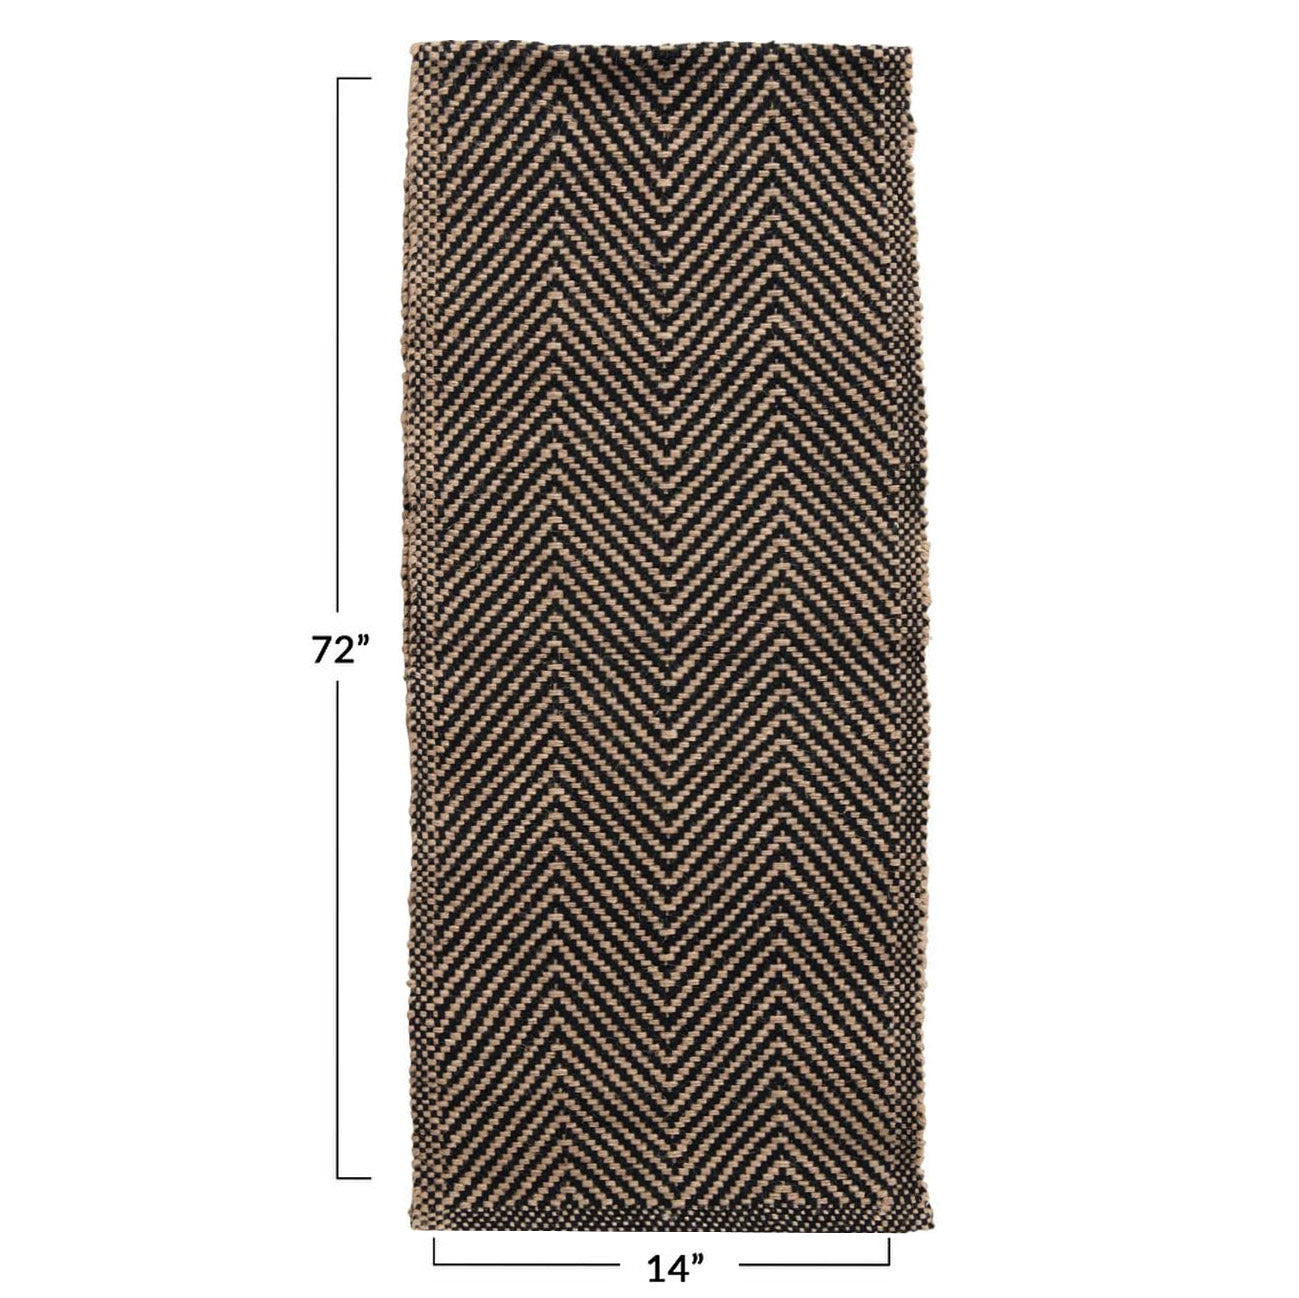 Woven Jute and Cotton Table Runner with Chevron Pattern" in Natural & Black meassuring 72"L x 14"W 